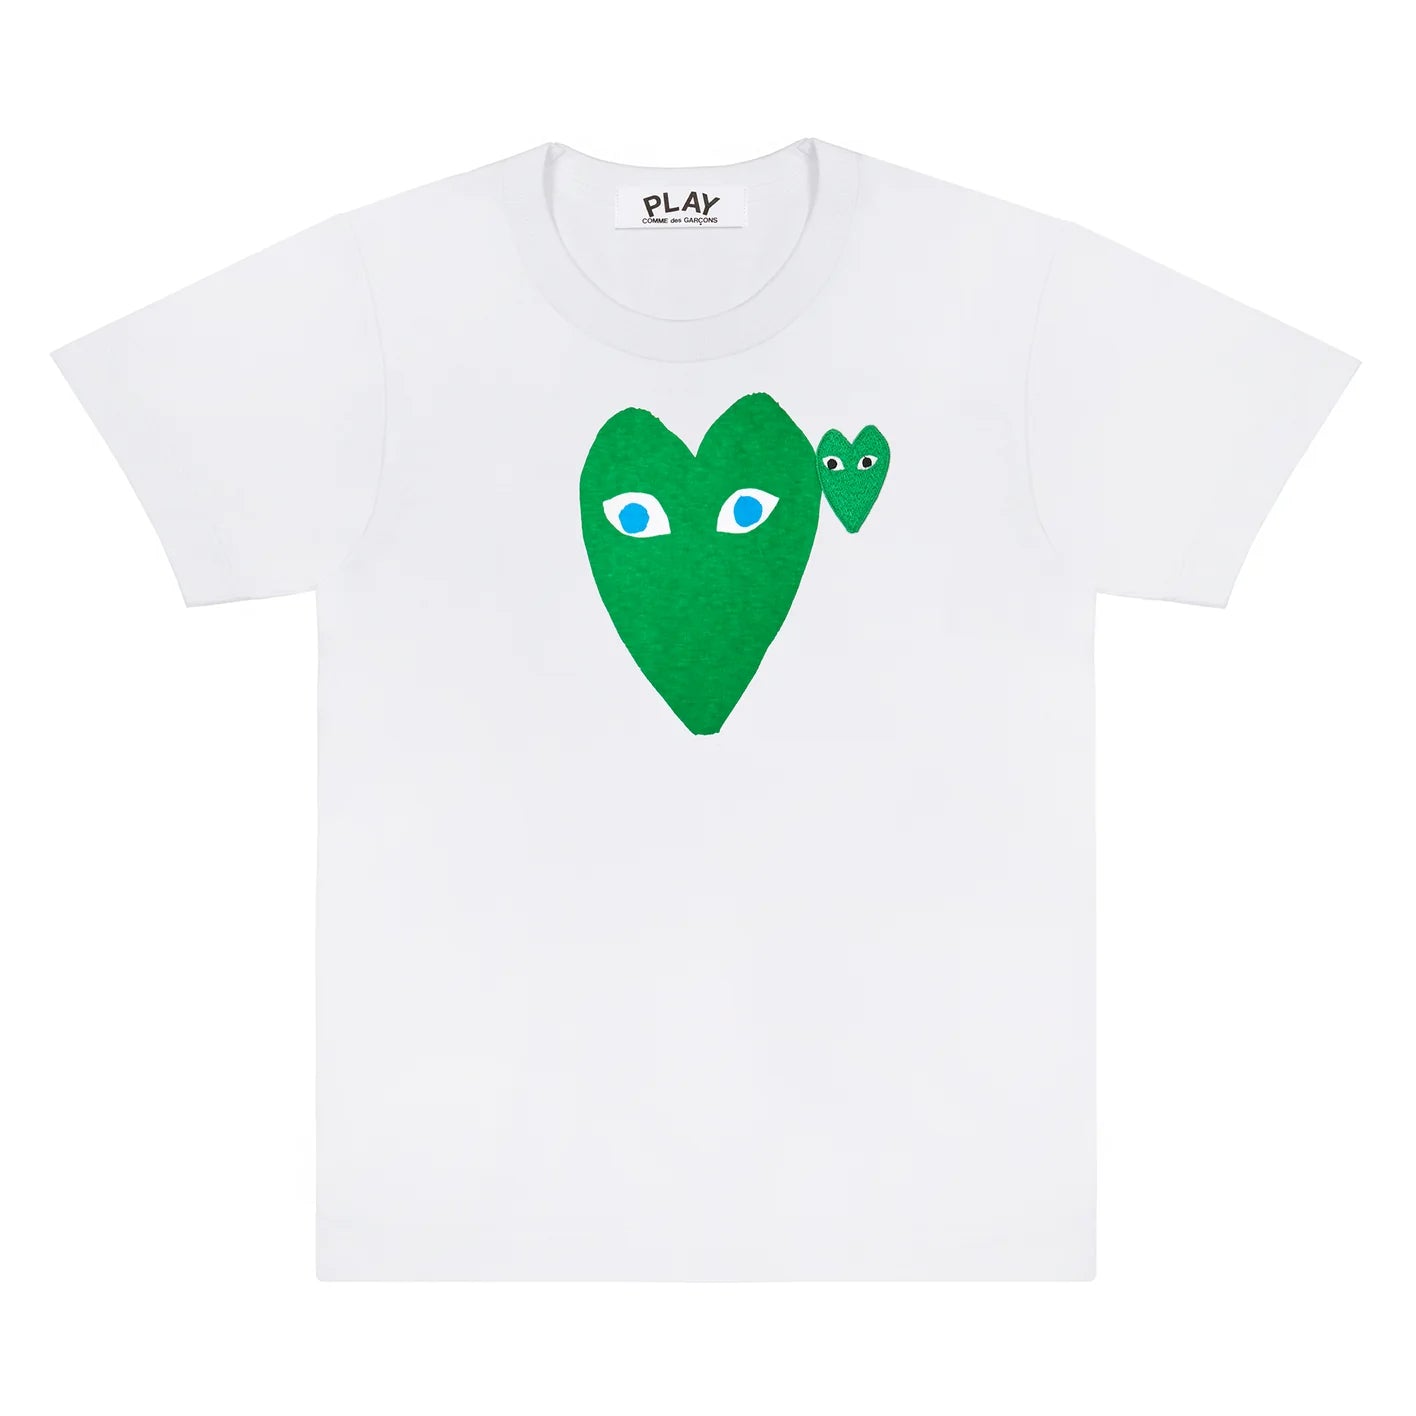 PLAY T-Shirt Large Green Heart with Blue Eyes